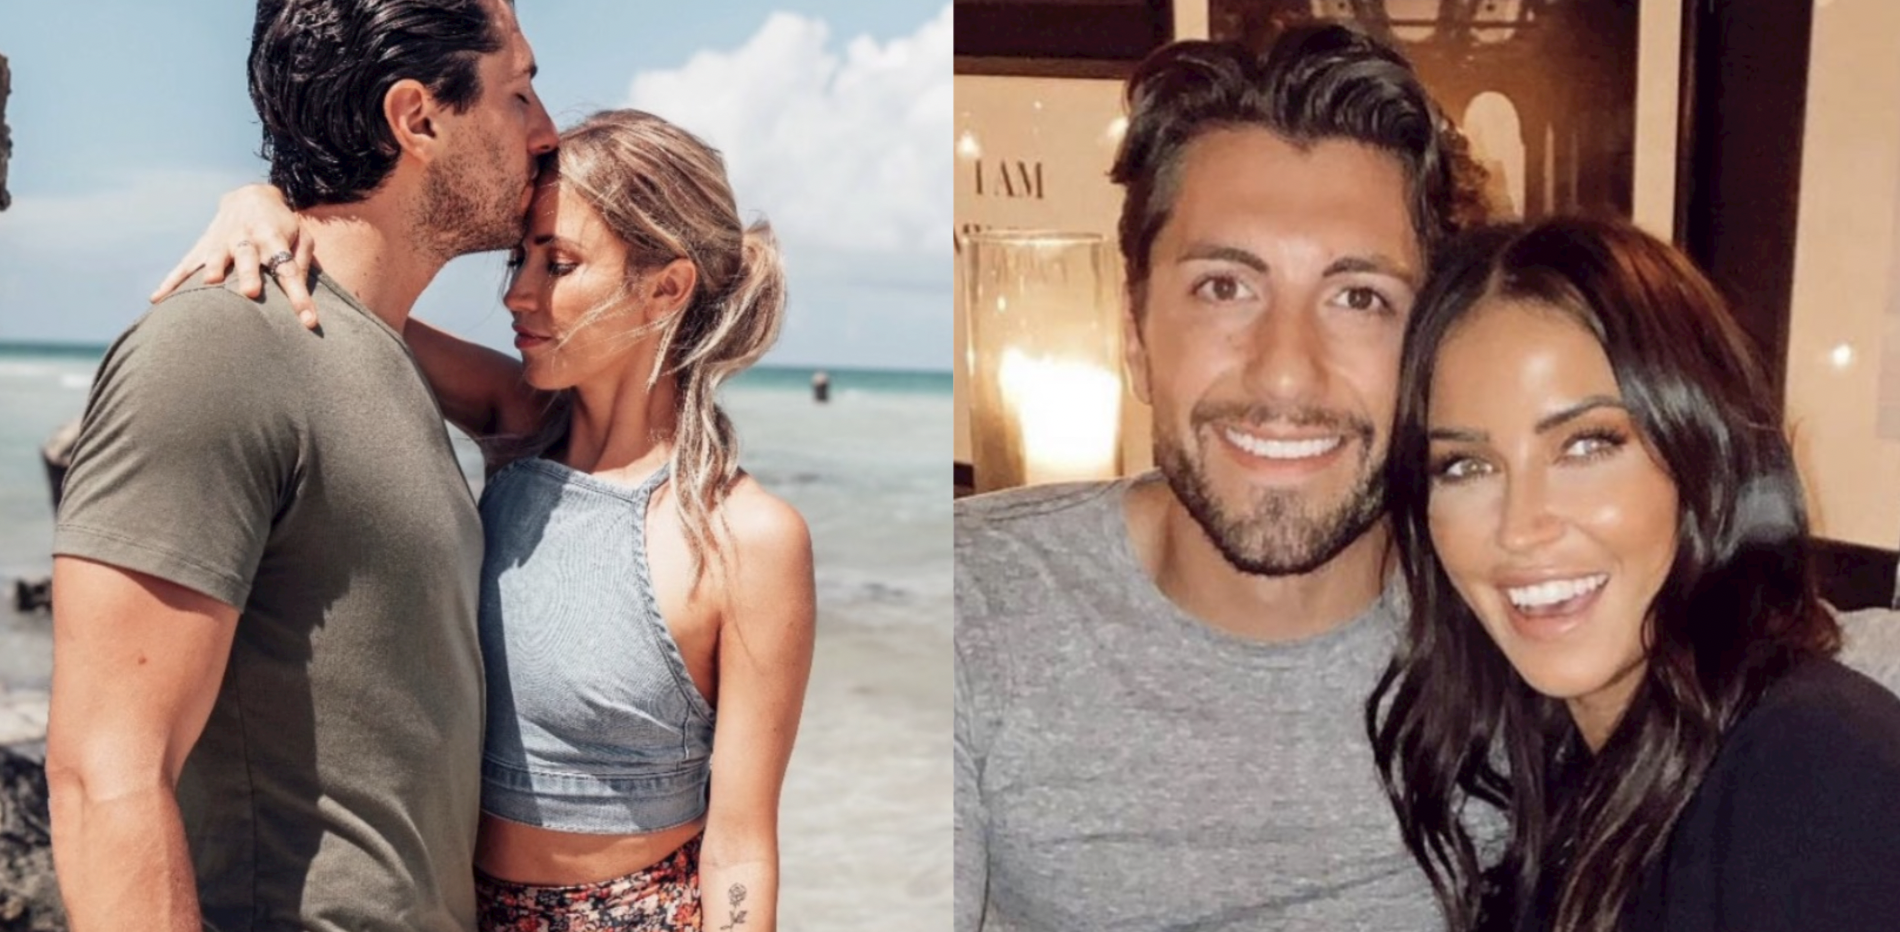 Kaitlyn Bristowe and Jason Tartick Share Reactions to Breakup